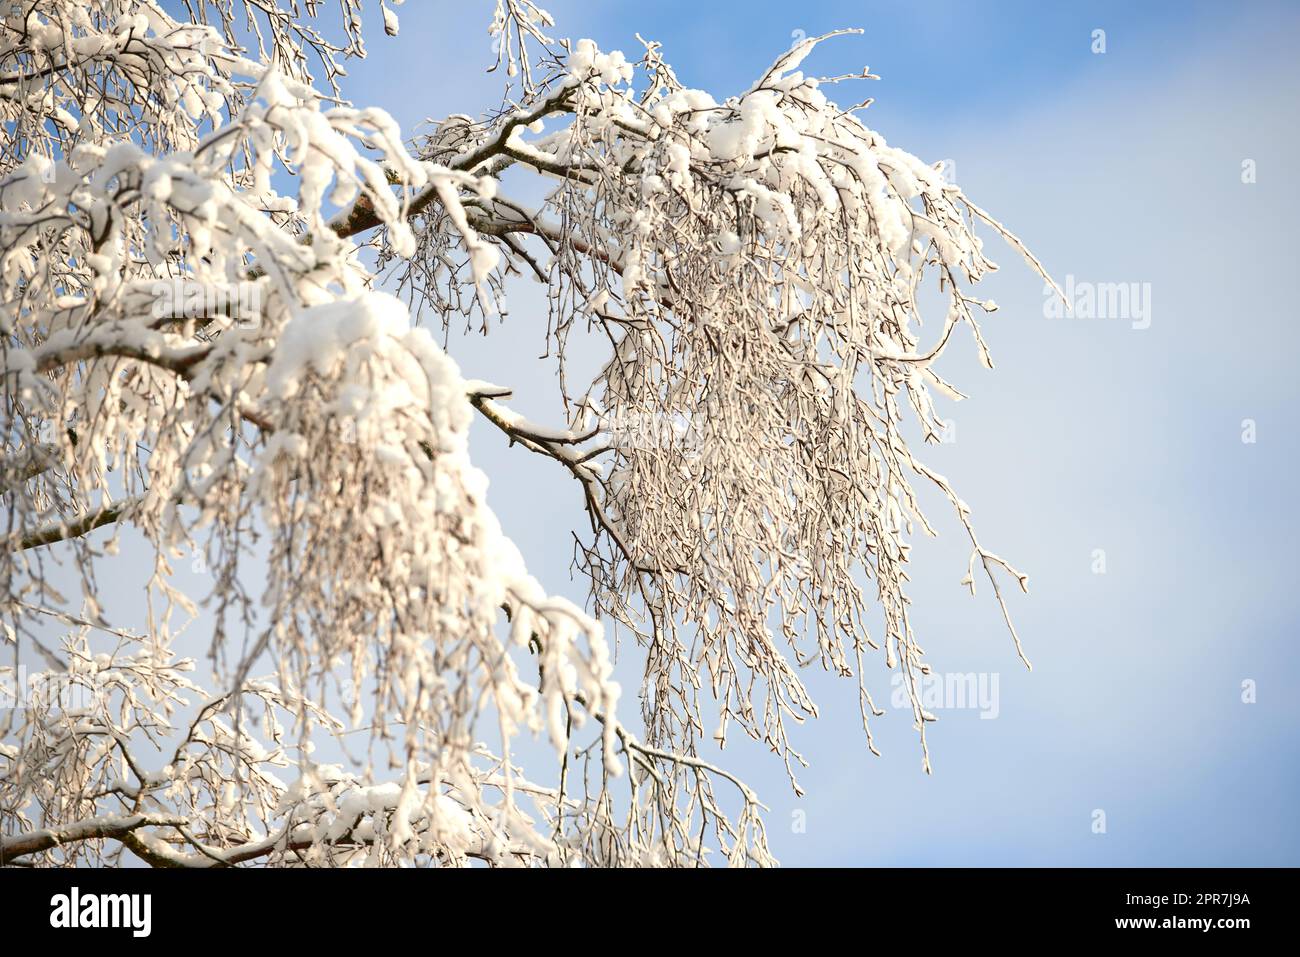 Snow covered tree branches on blue white sky with copy space. A closeup winter landscape of snowy or frosty trees in a forest for Christmas holiday or seasonal holiday background Stock Photo